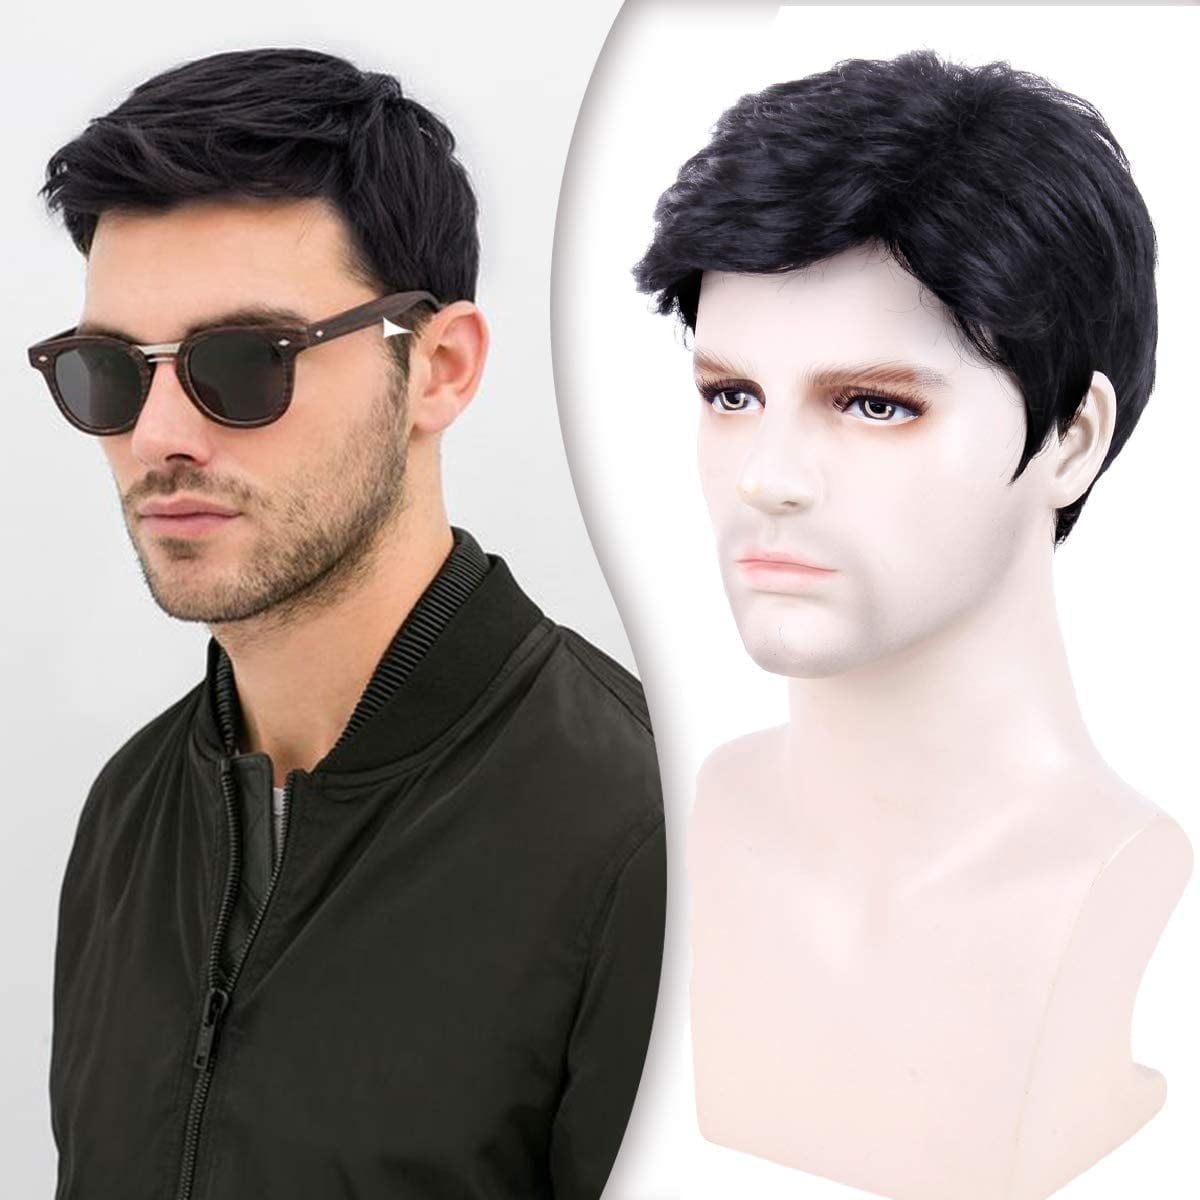 wings hair style — hairstyle for men Series 1, by digitalwave.one